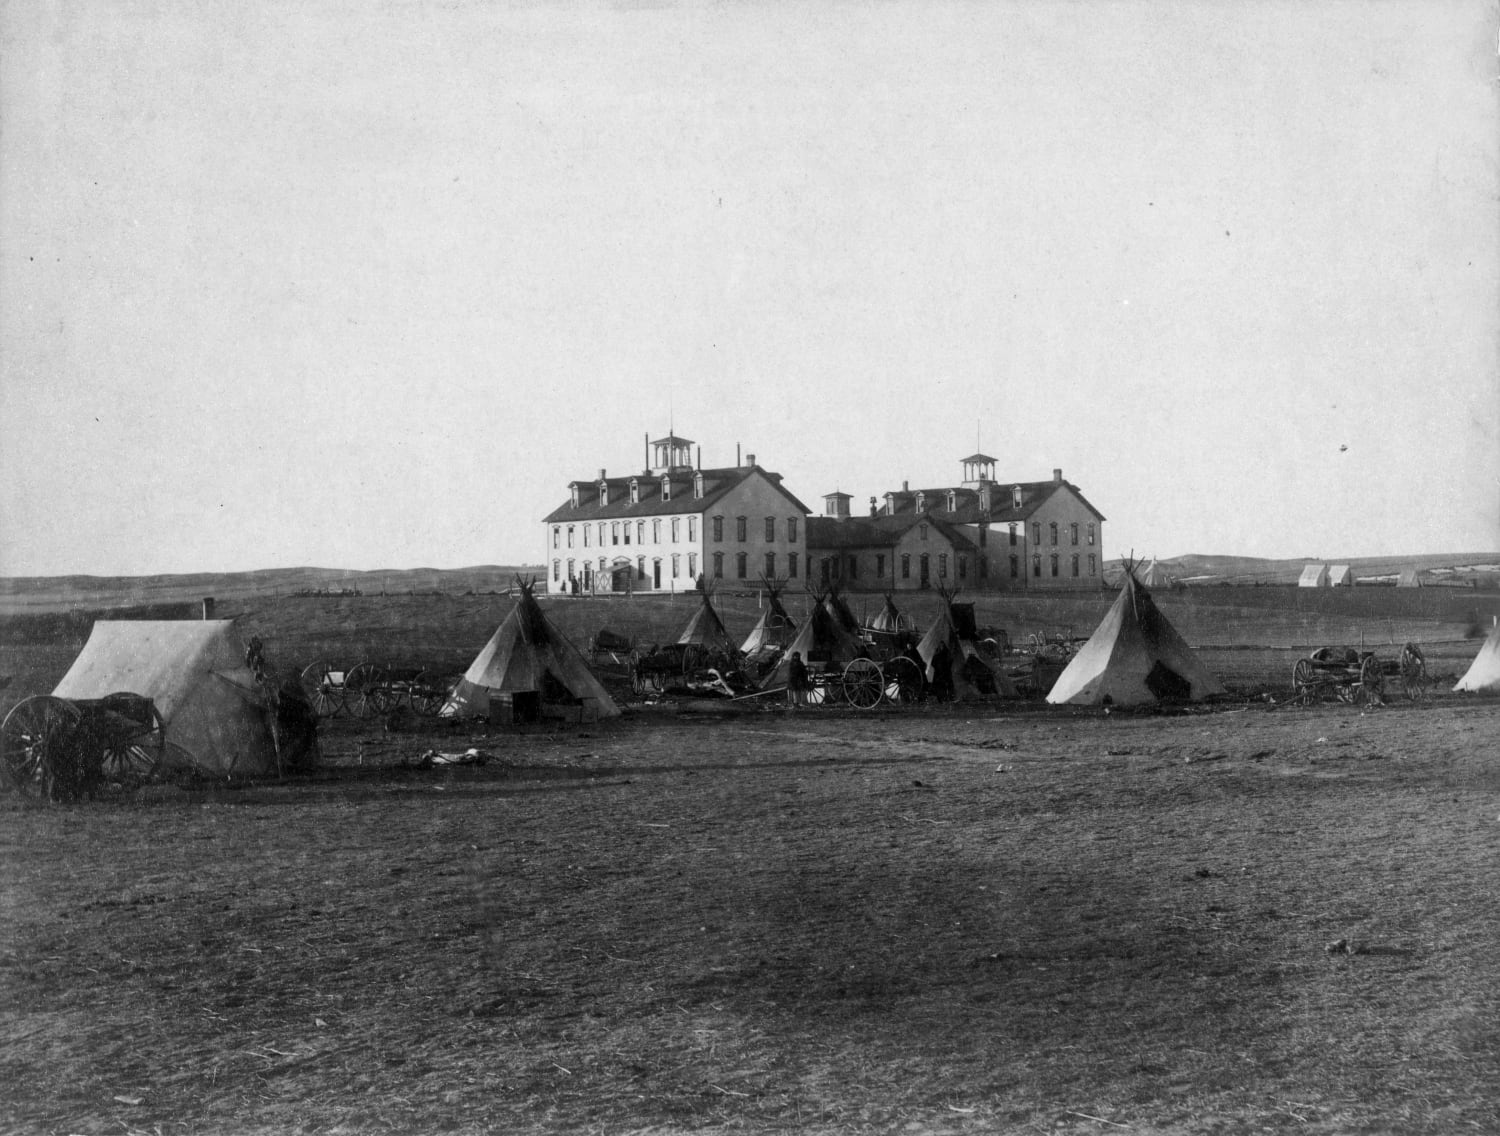 Native American parents camping outside Indian boarding schools where their children were (possibly) taken by force. Pine ridge, south Dakota, 1891.